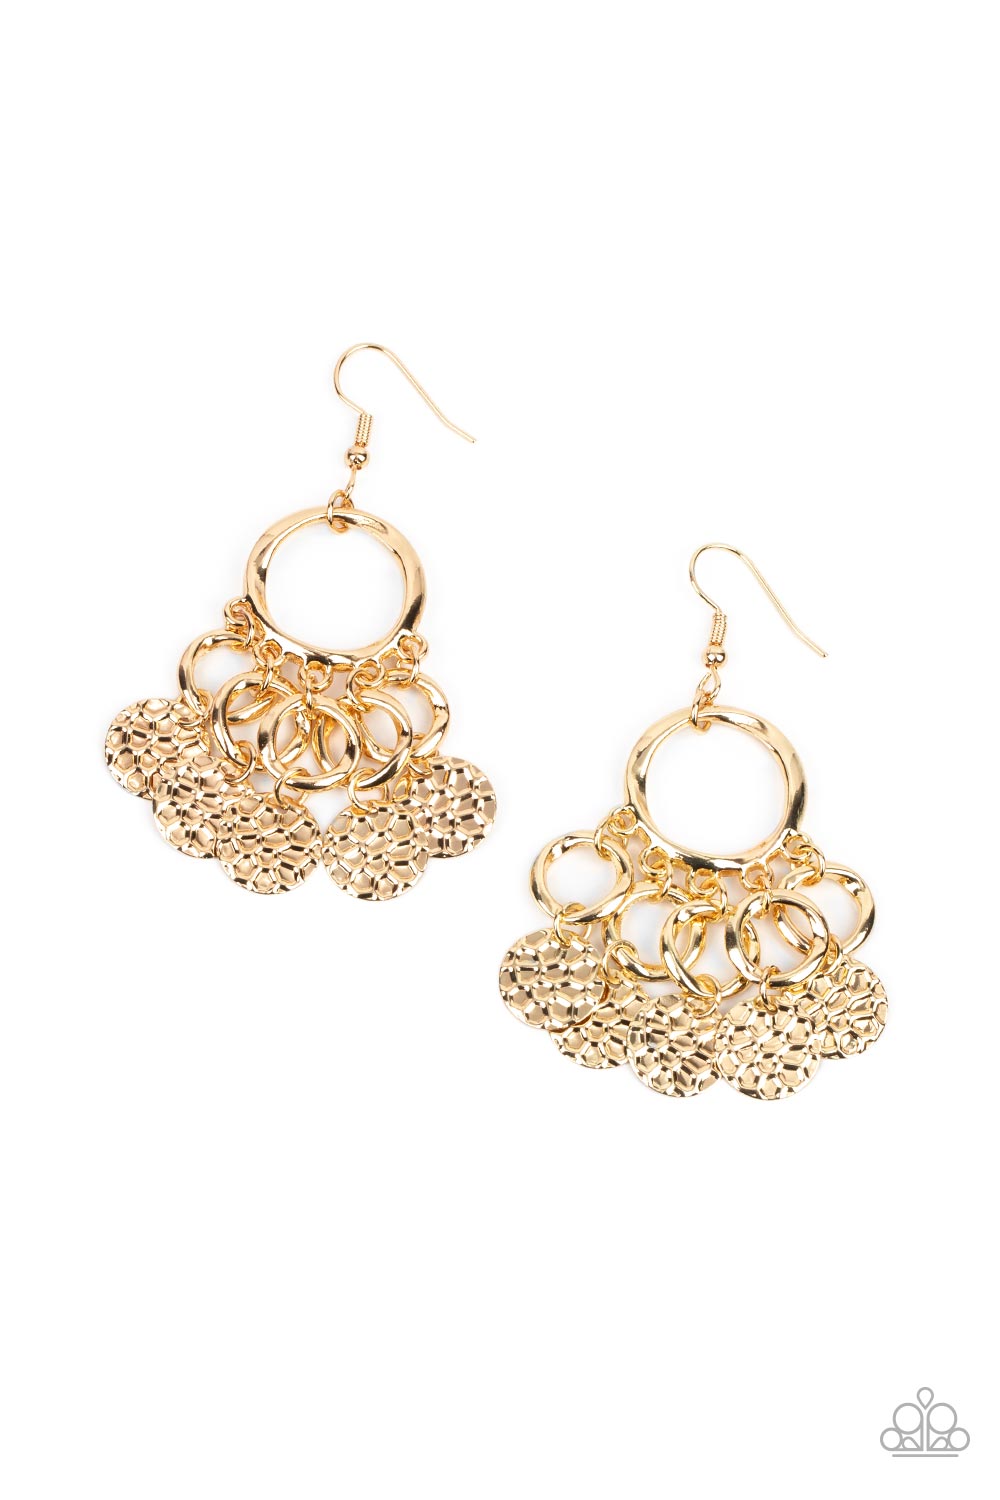 Partners in CHIME - Gold Earrings - Paparazzi Accessories